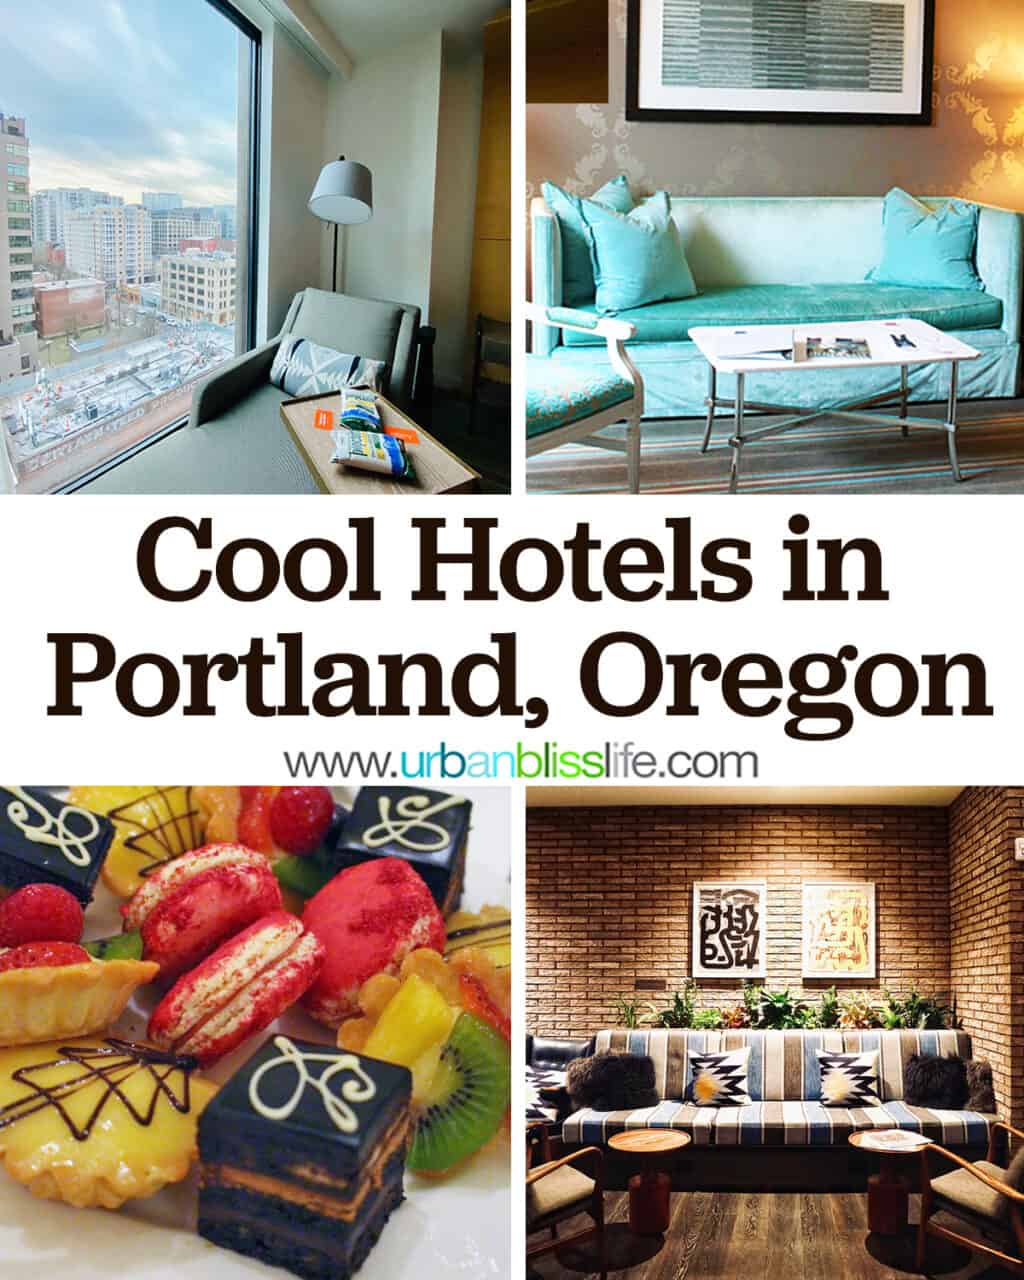 four photos of Portland hotels: room view, sitting area, fruit tray, and business center with title text that reads "Cool hotels in Portland, Oregon"